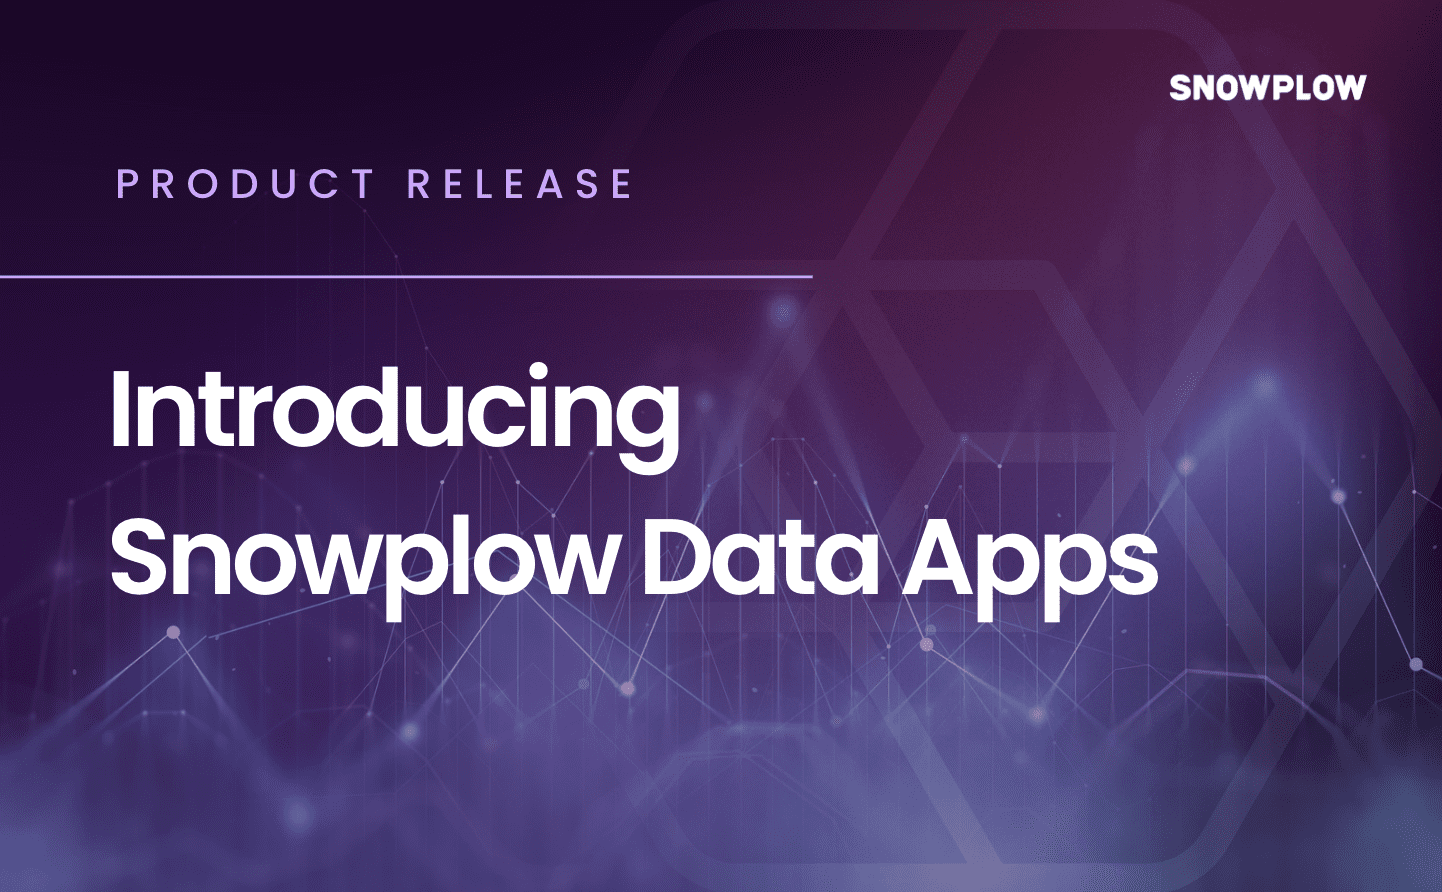 Introducing Data Apps